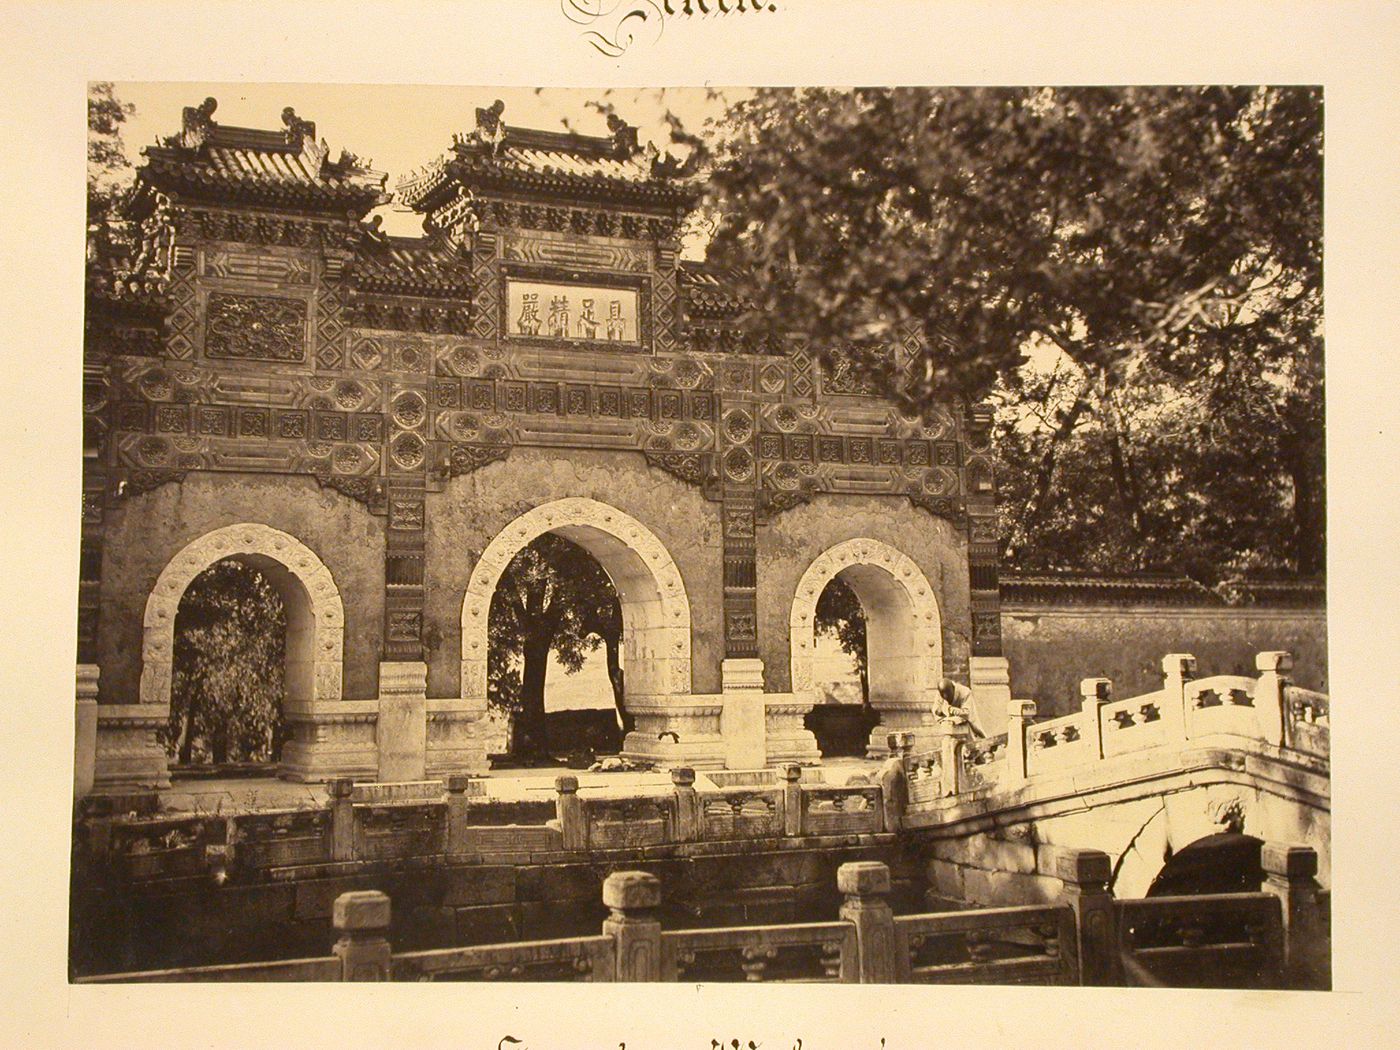 View of an arched gateway and bridge at the The Monastery of Universal Awakening [Shifang Pujue] (also known as the Temple of the Sleeping Buddha, Reclining or Recumbent Buddha [Wuofo Si]), Western Hills, near Peking (now Beijing), China